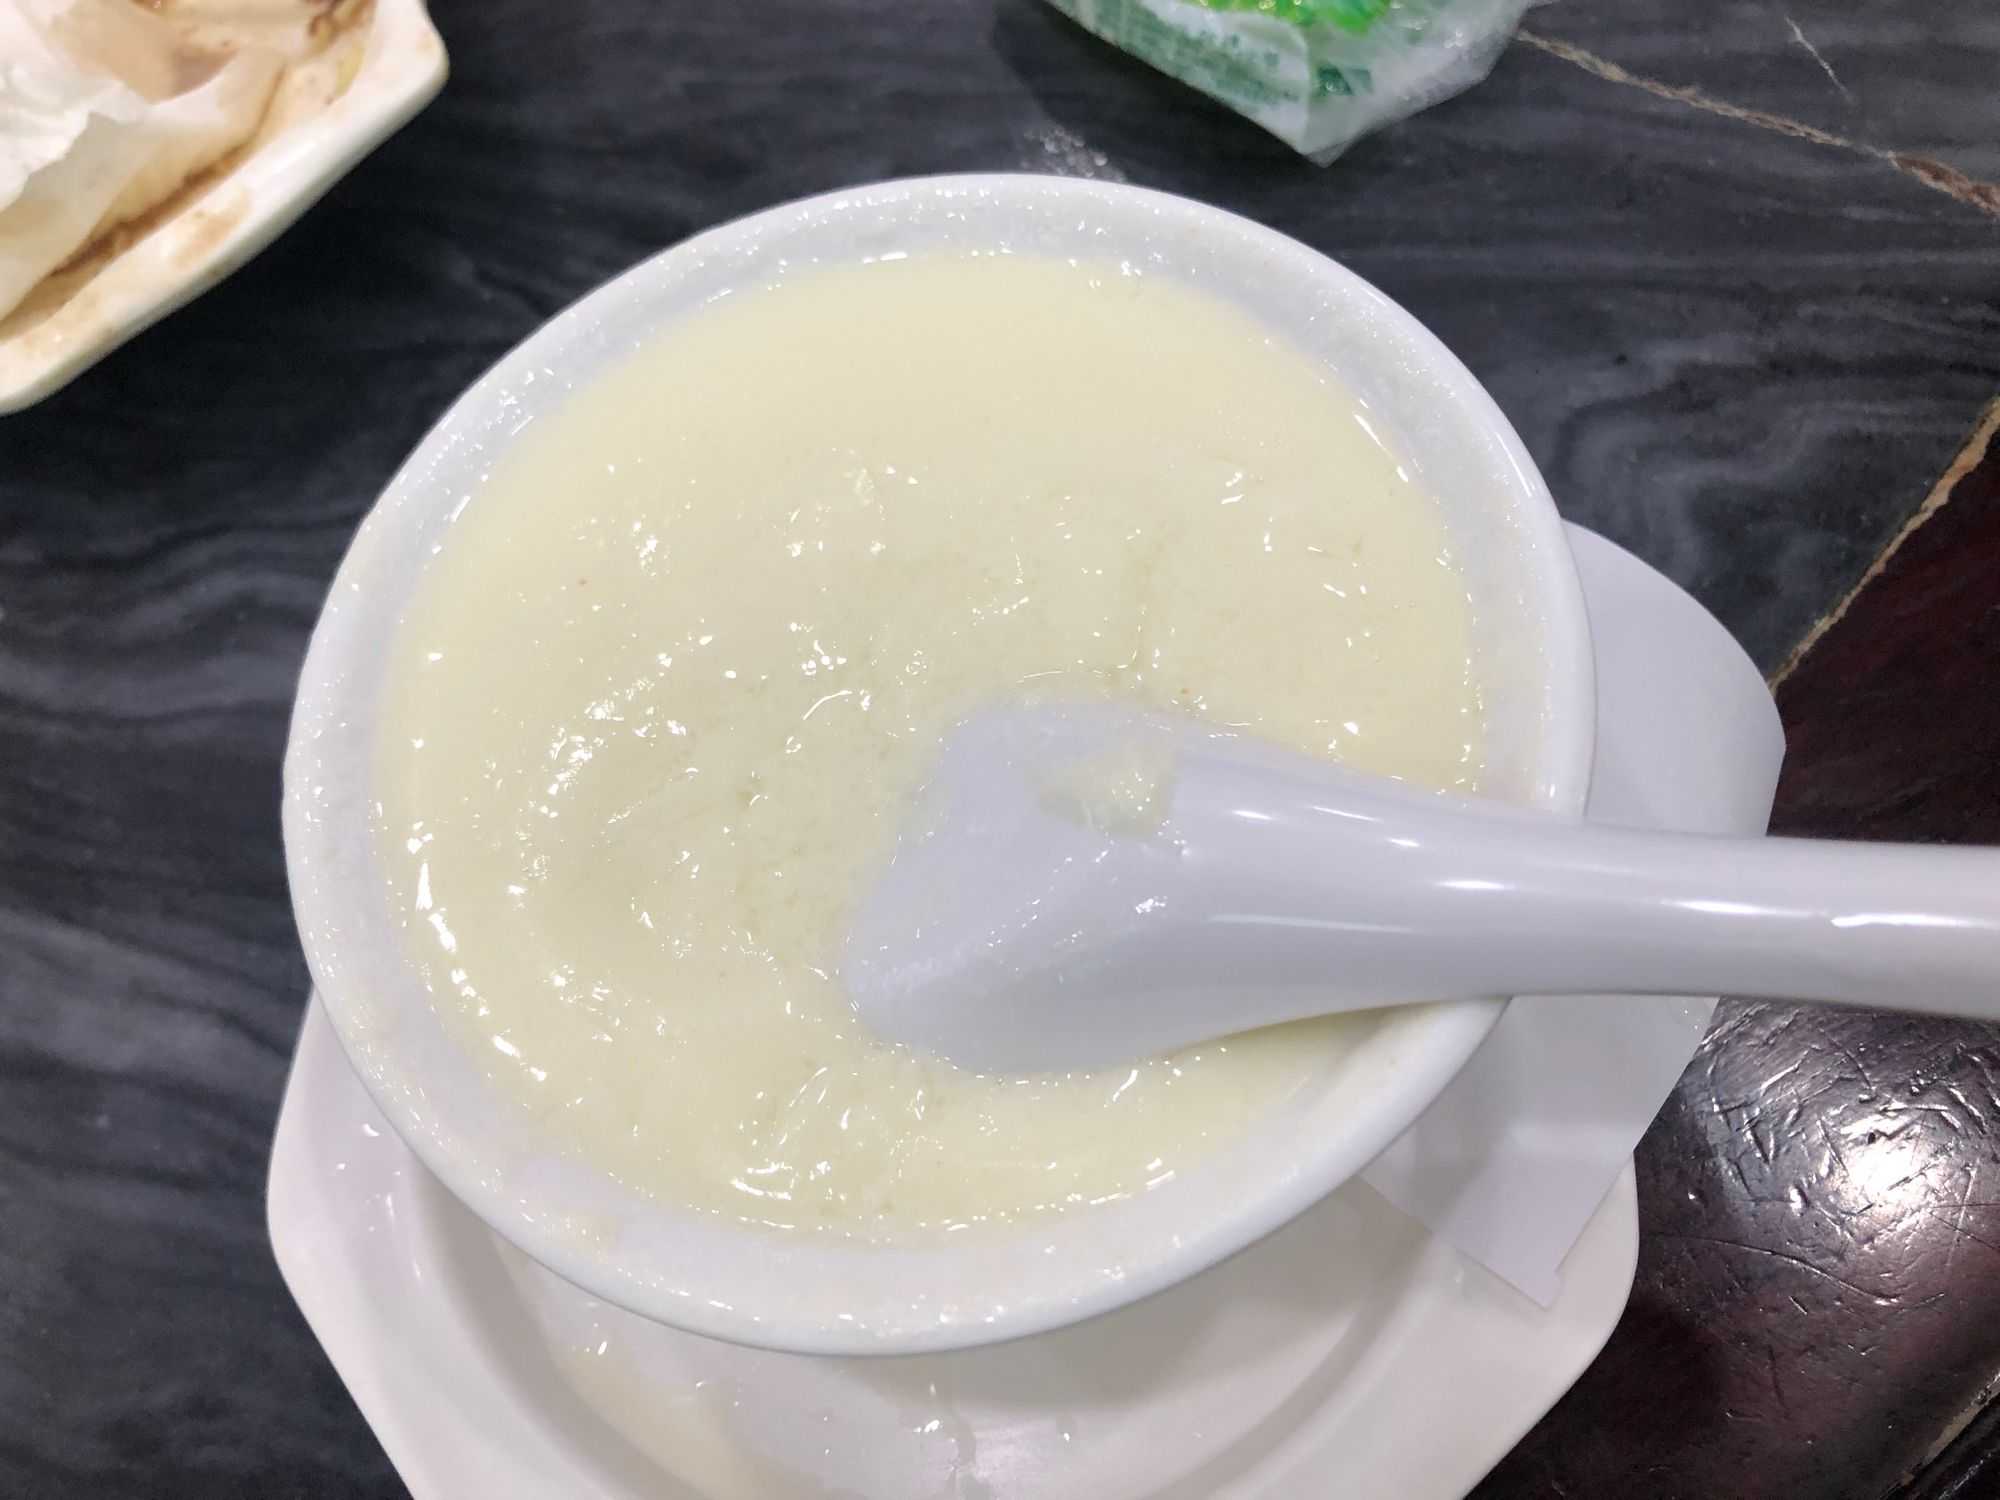 Double skin milk pudding (燉雙皮奶) (Image by author)